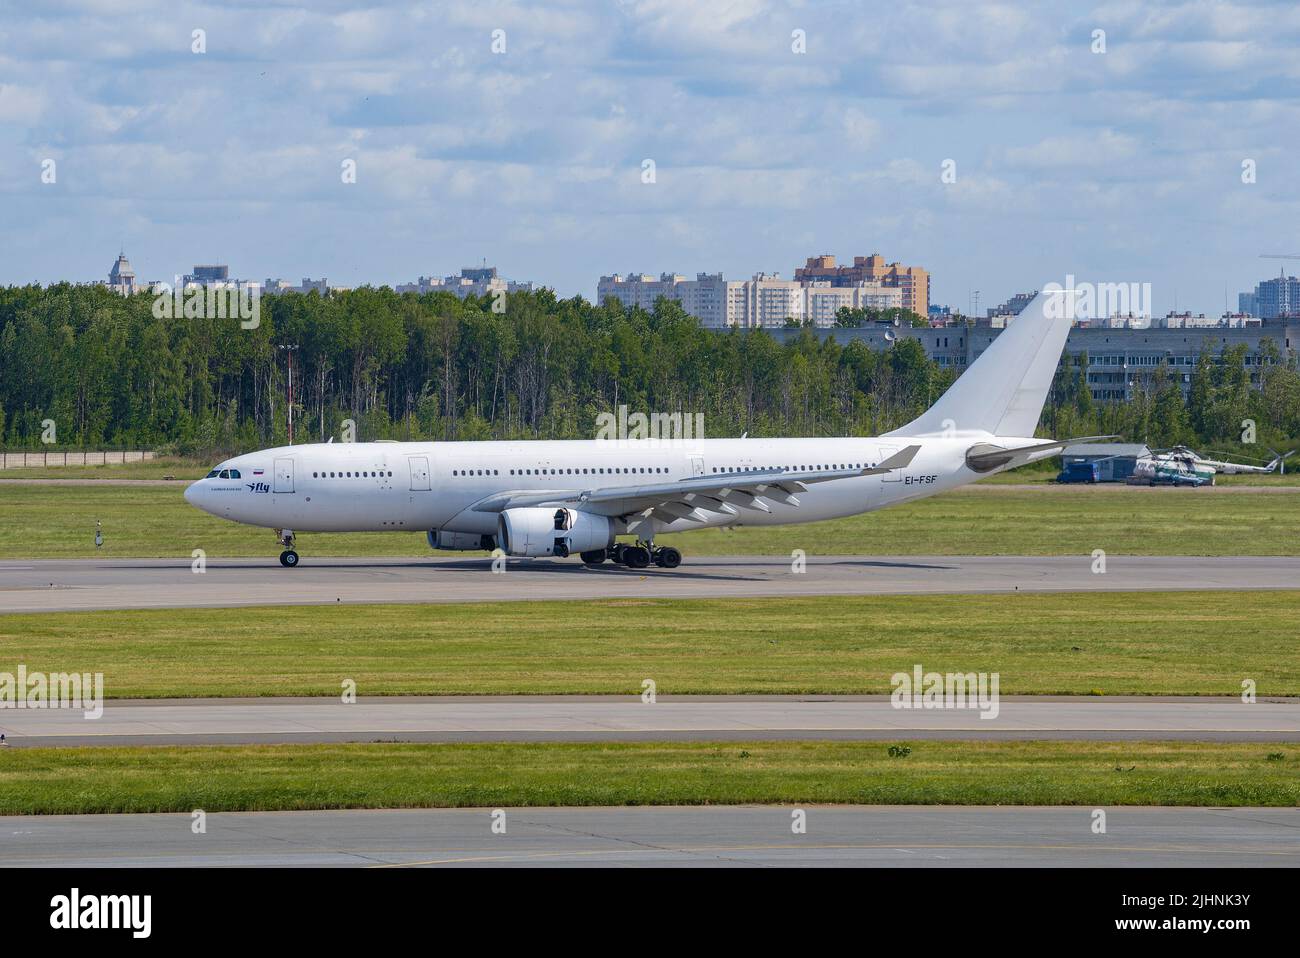 SAINT PETERSBURG, RUSSIA - JUNE 20, 2018: Airbus A330-243 (EI-FSF) of I-Fly airline on the airfield of Pulkovo airport Stock Photo